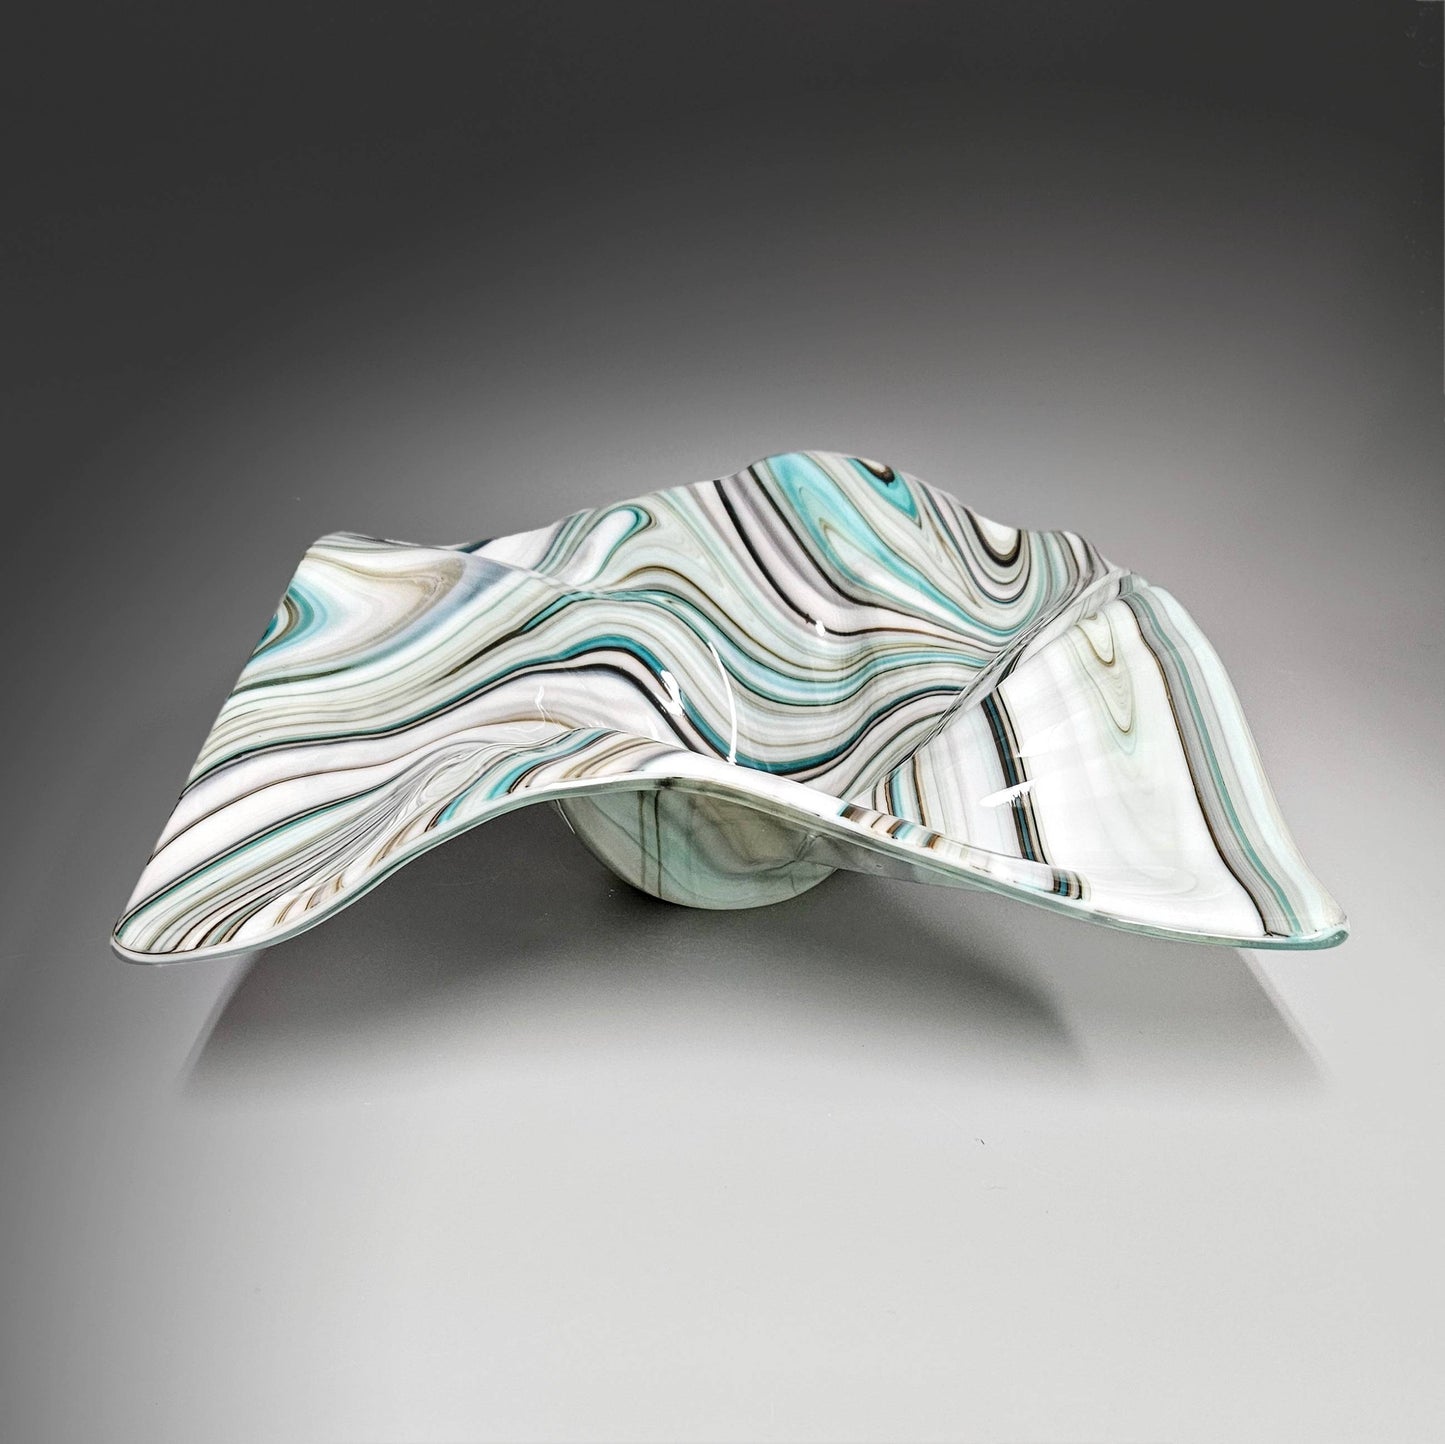 Glass Art Wave Bowl in Aqua Gray and White